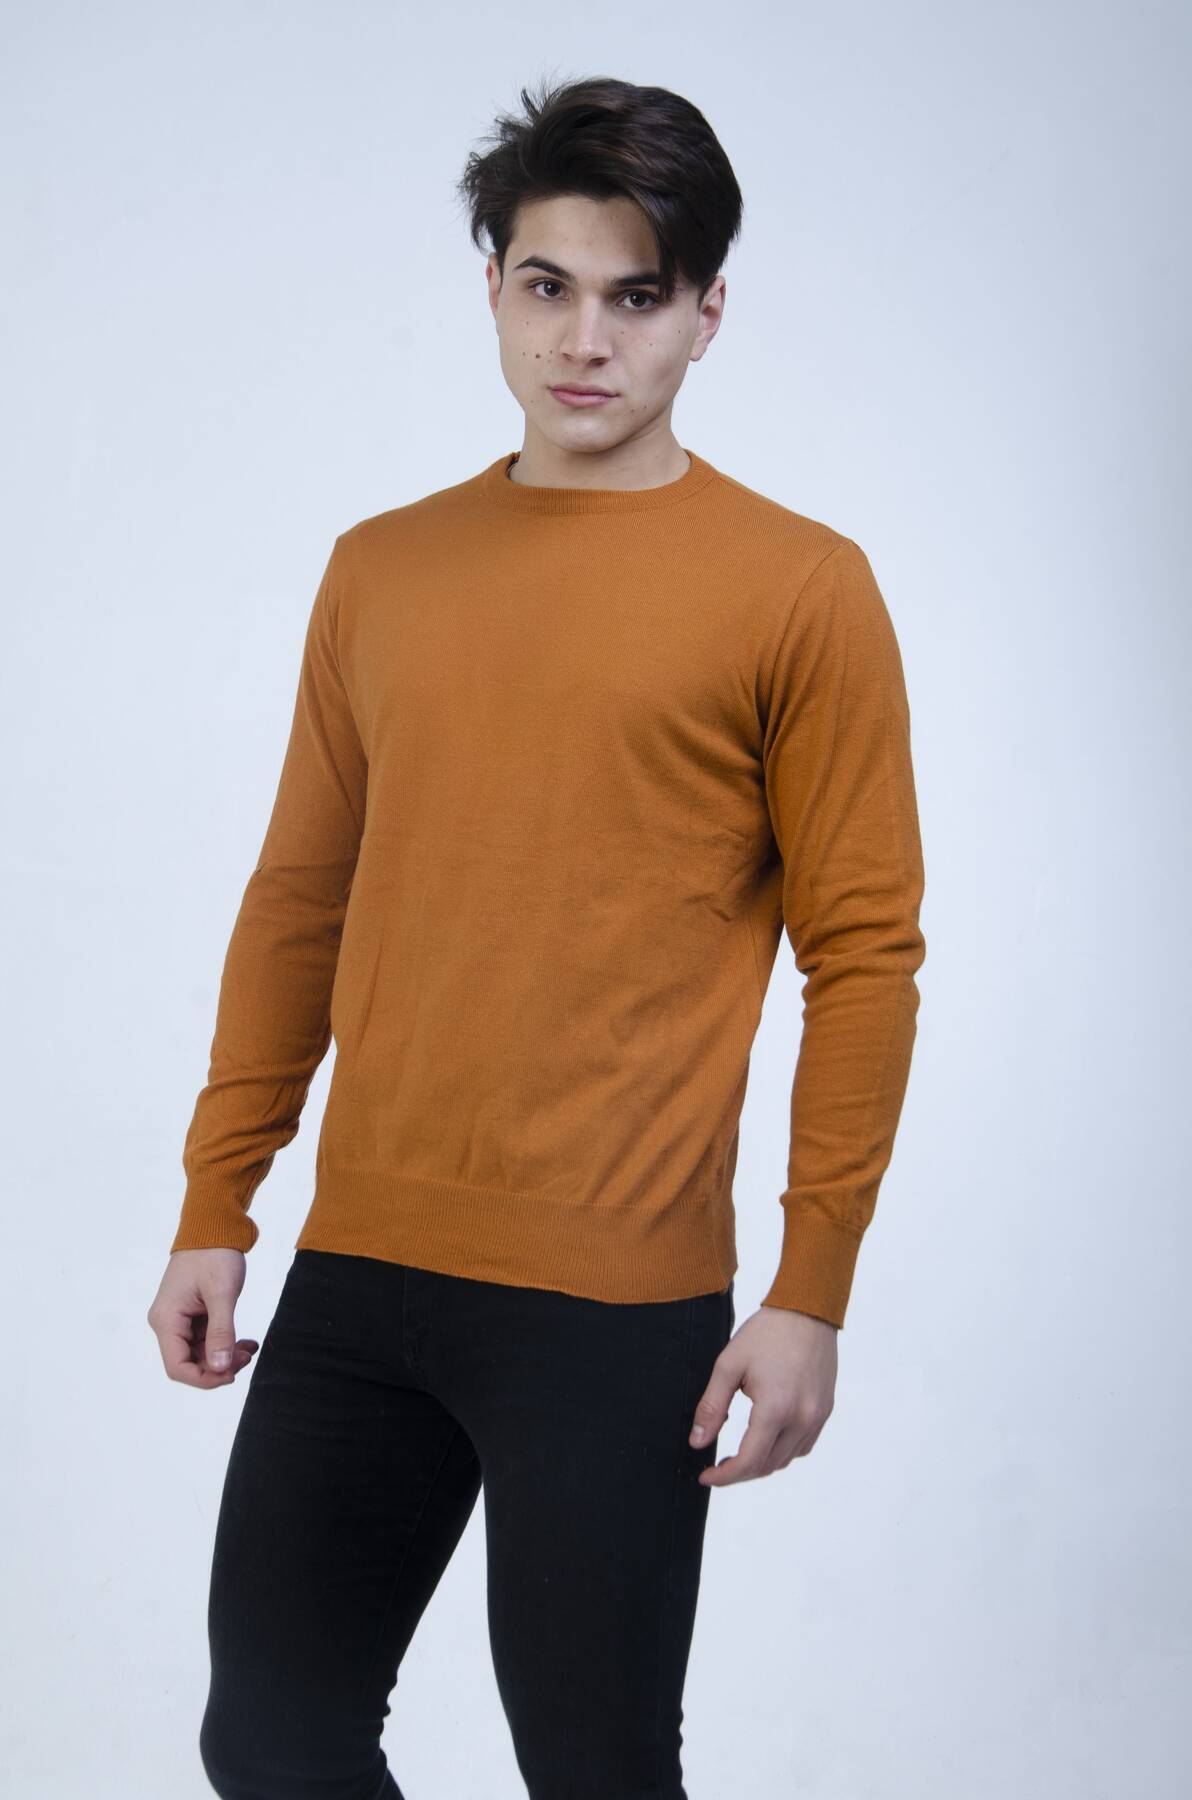 Imagen producto Sweater 8499 11